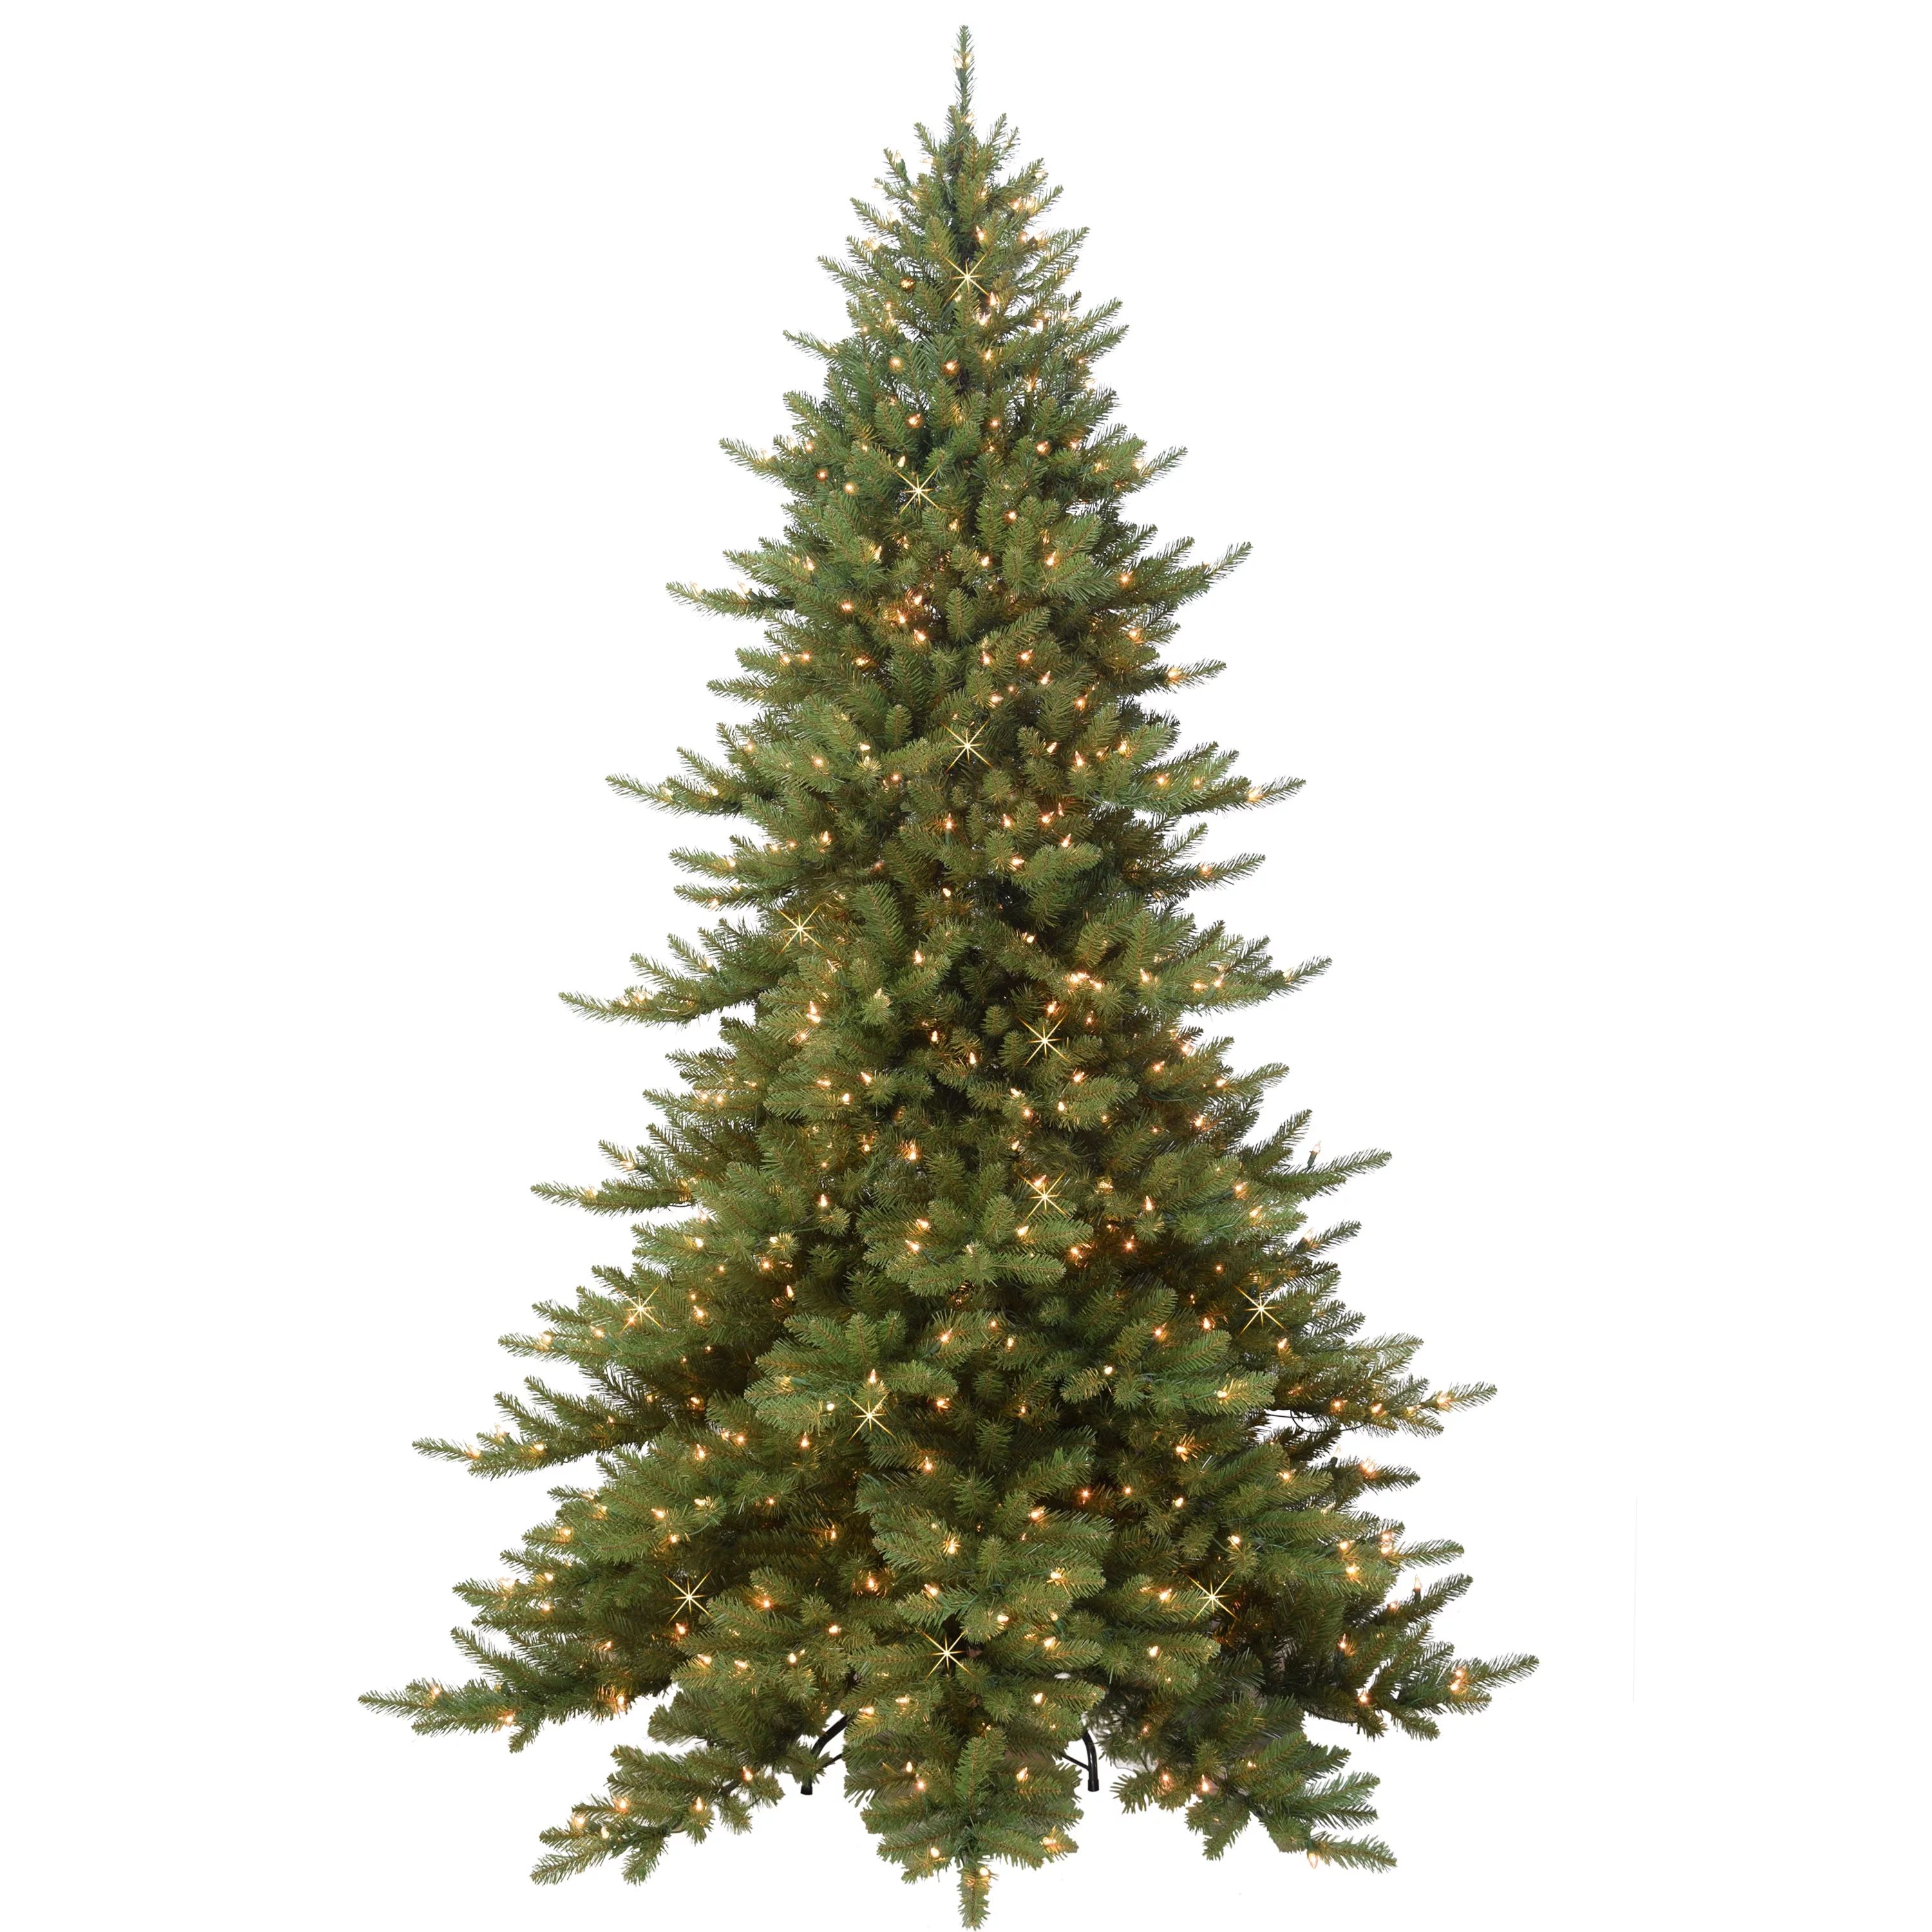 NEW! Puleo Intl. 7.5' ROYAL MAJESTIC Fraser Fir Green Tree with MEMORY TIPS and SURE-LIT POLE wit... | Walmart (US)